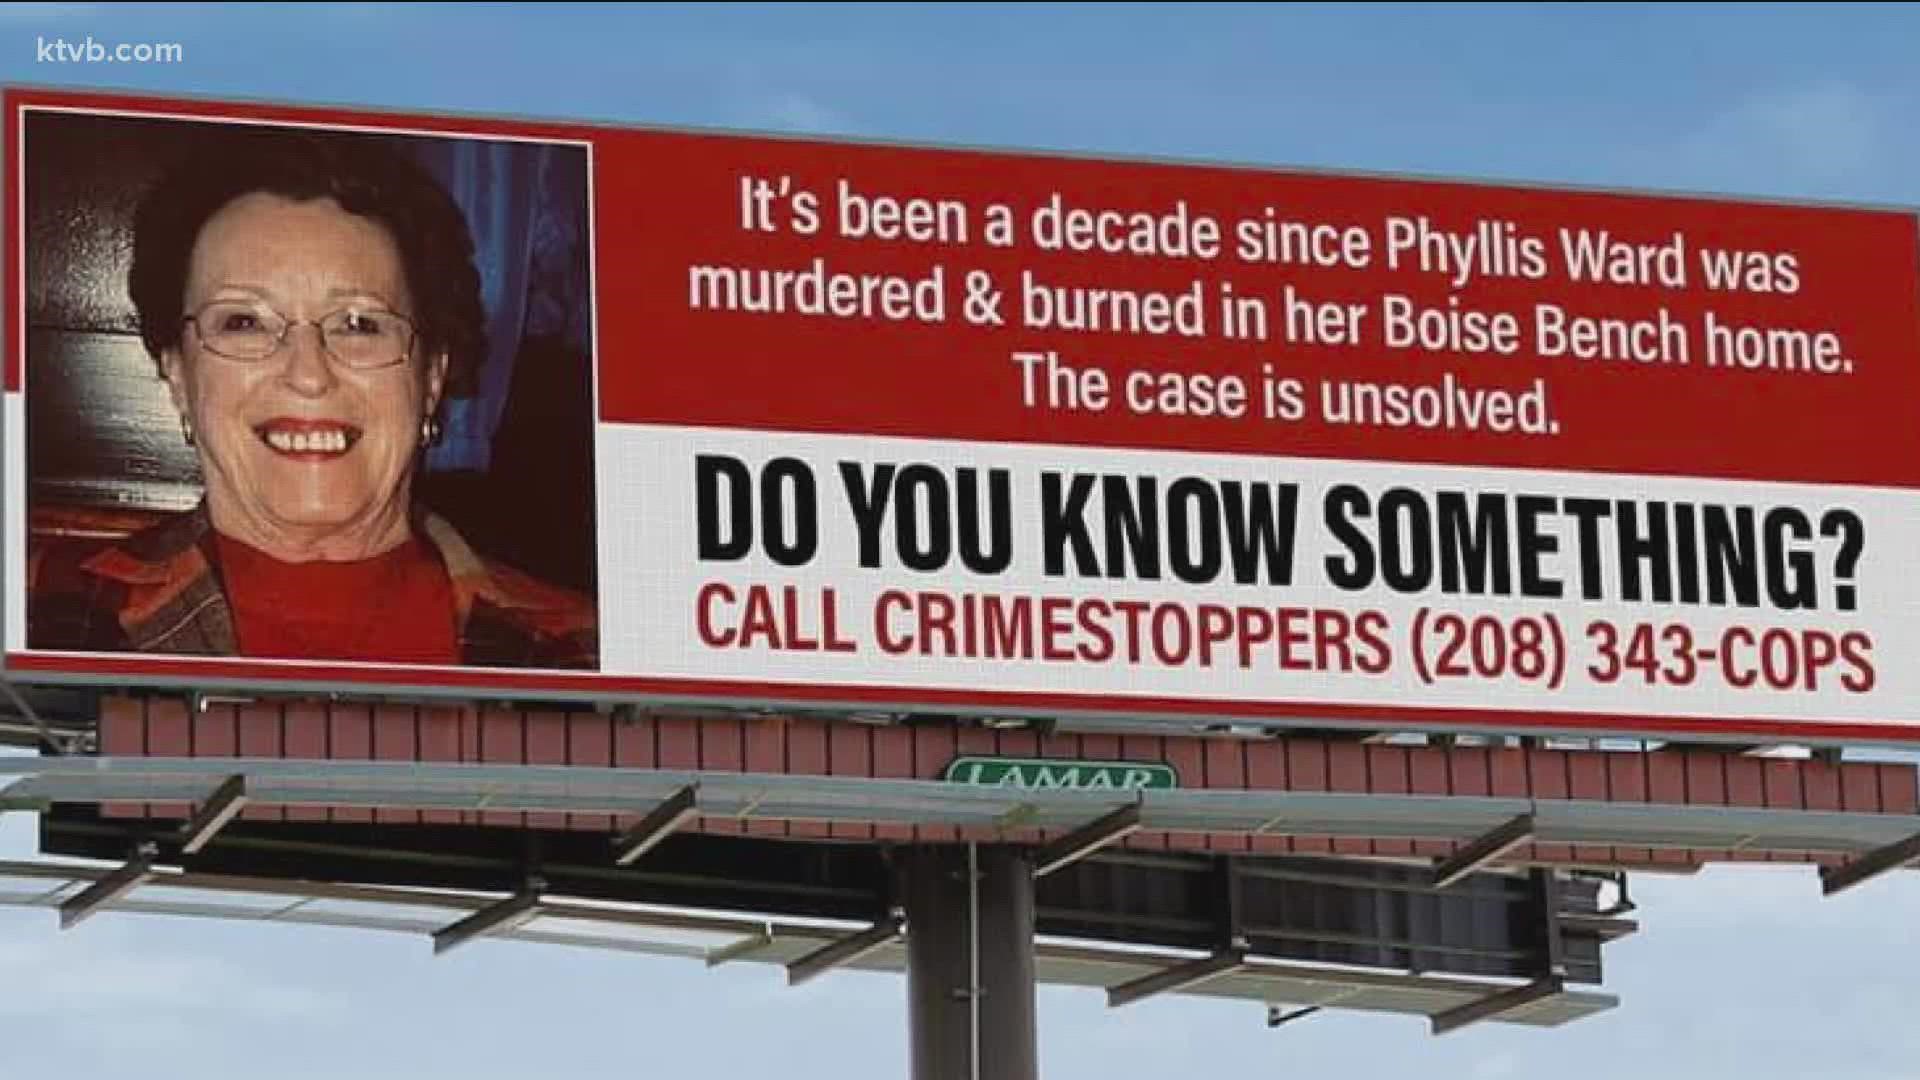 Phyllis Ward, 74, was found murdered in her Boise Bench home July 23, 2012. No arrests have been made and no suspects have been named in connection to the crime.